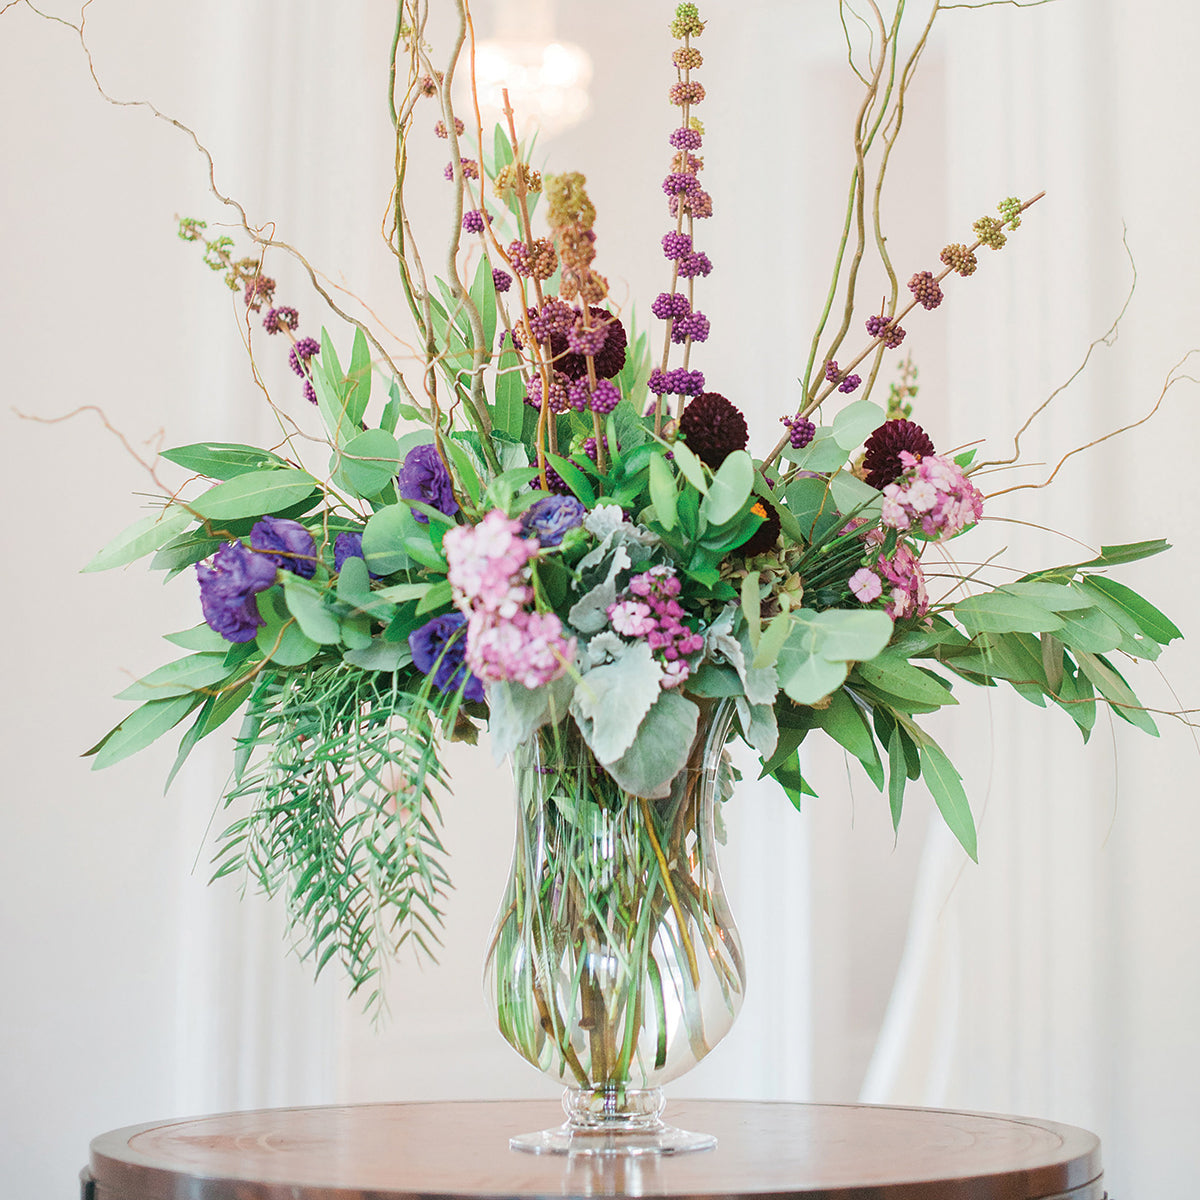 An elaborate bouquet in the Charlotte vase, with tall, twisting branches, deep purple flowers, and vibrant greenery, creating a dramatic and elegant centerpiece on a round wooden table, with a soft, neutral backdrop.